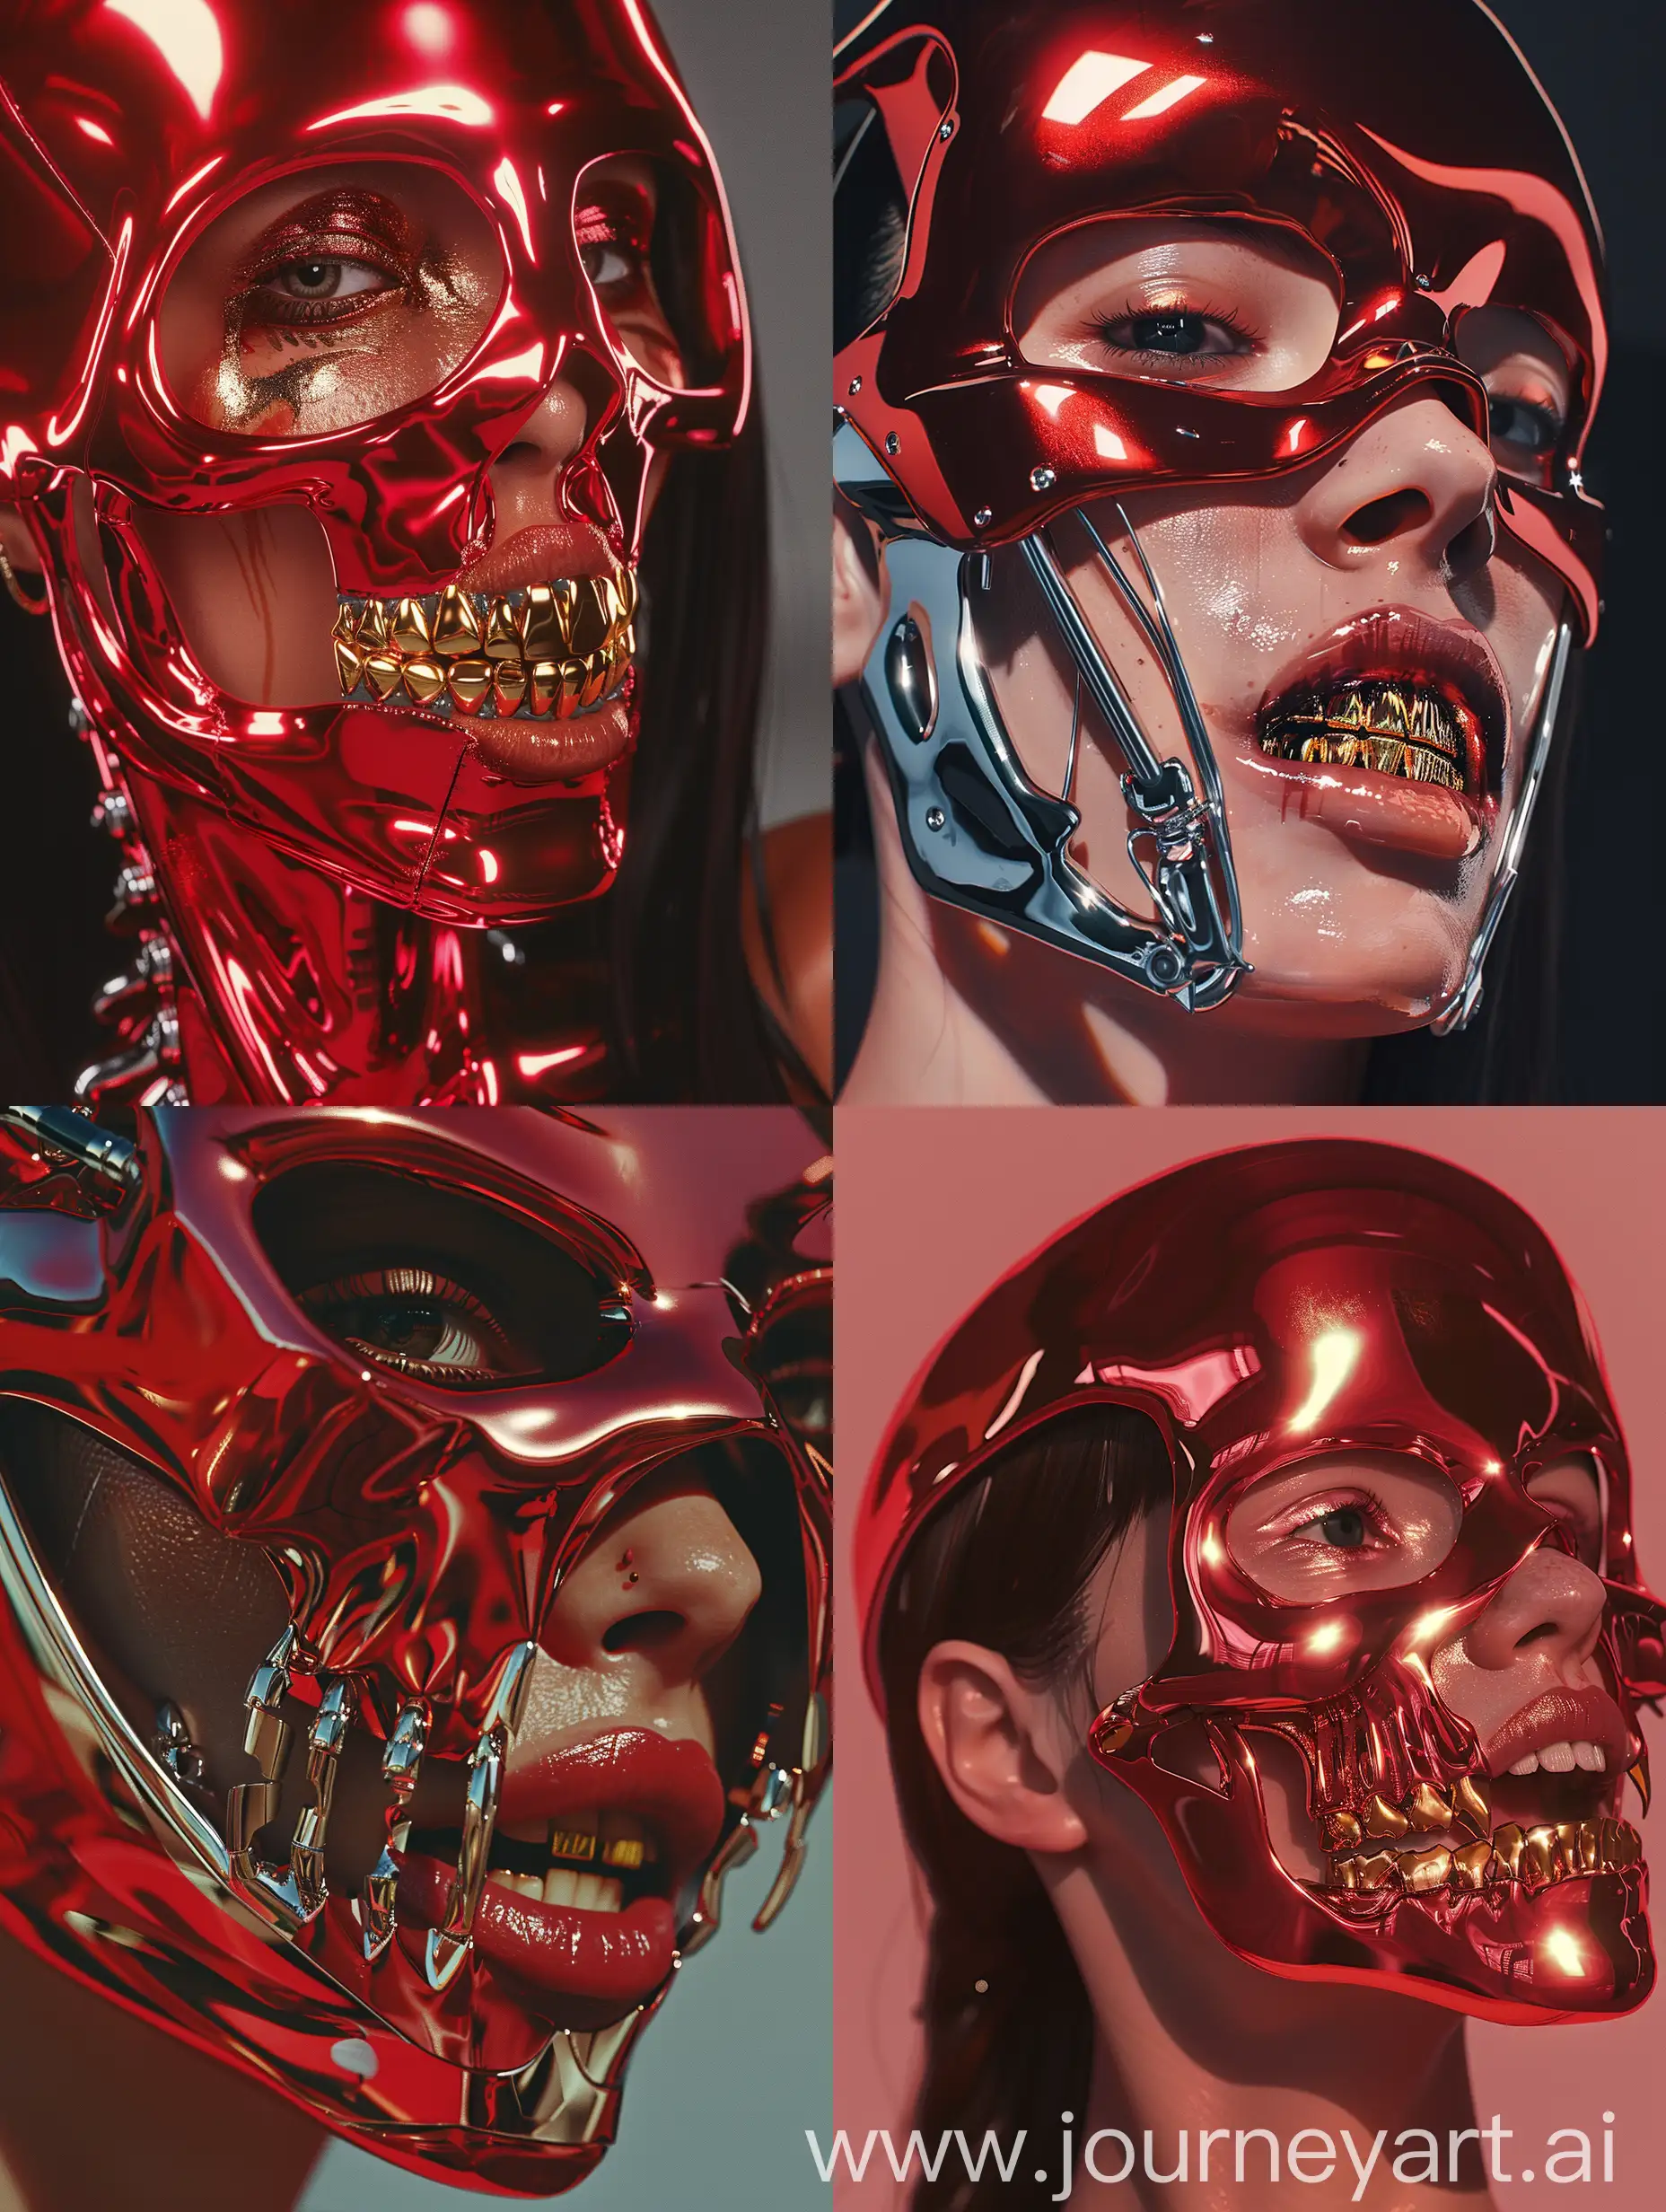 Cyberpunk-Woman-with-Glossy-Red-Exoskeleton-Mask-in-Hyperrealistic-Portrait